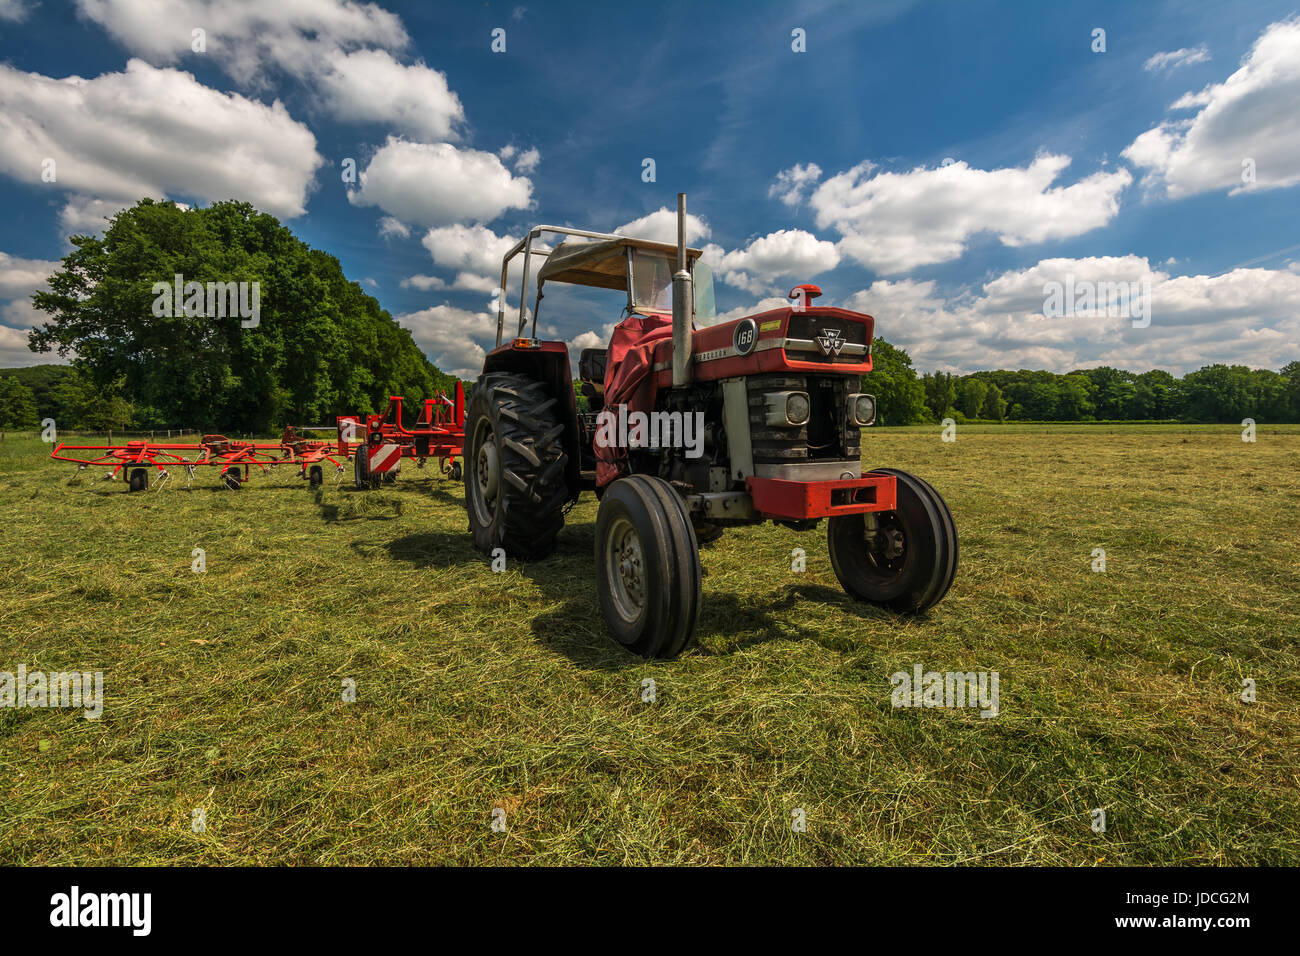 A tractor with a hay tedder standing on a field after tedding the grass for the preparation of hay on a hot summer day in the Netherlands Stock Photo